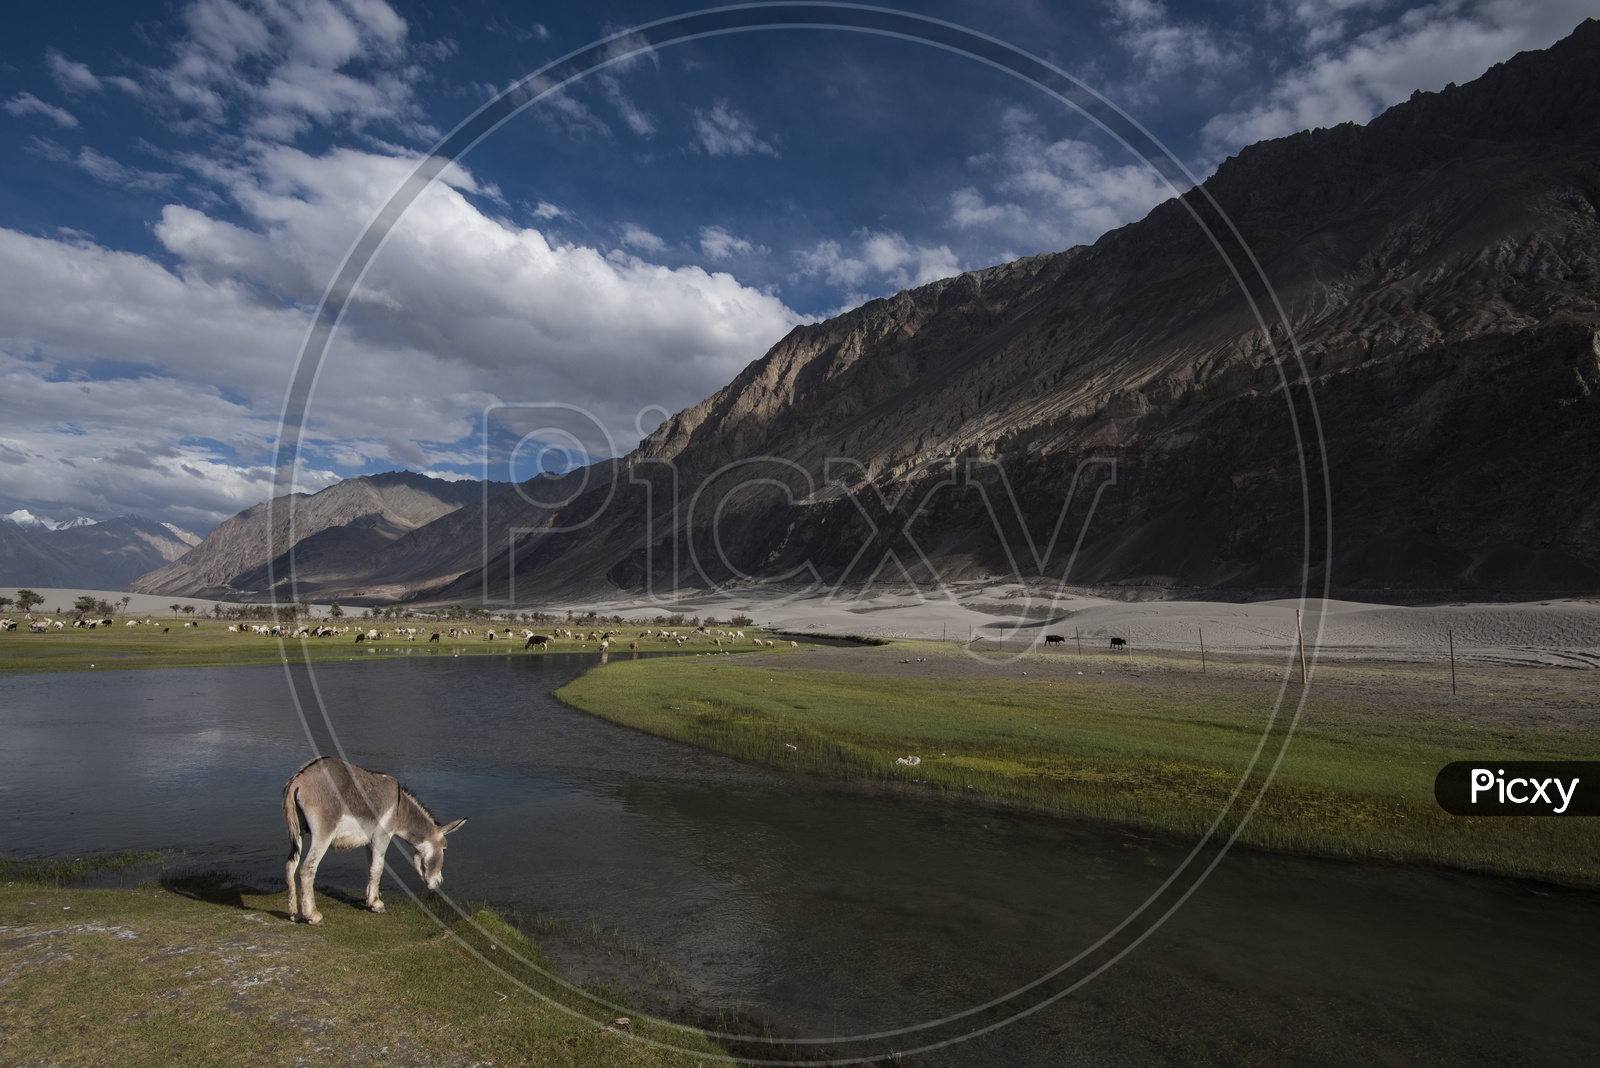 Landscapes of Leh - Mountains, Lakes & a dog